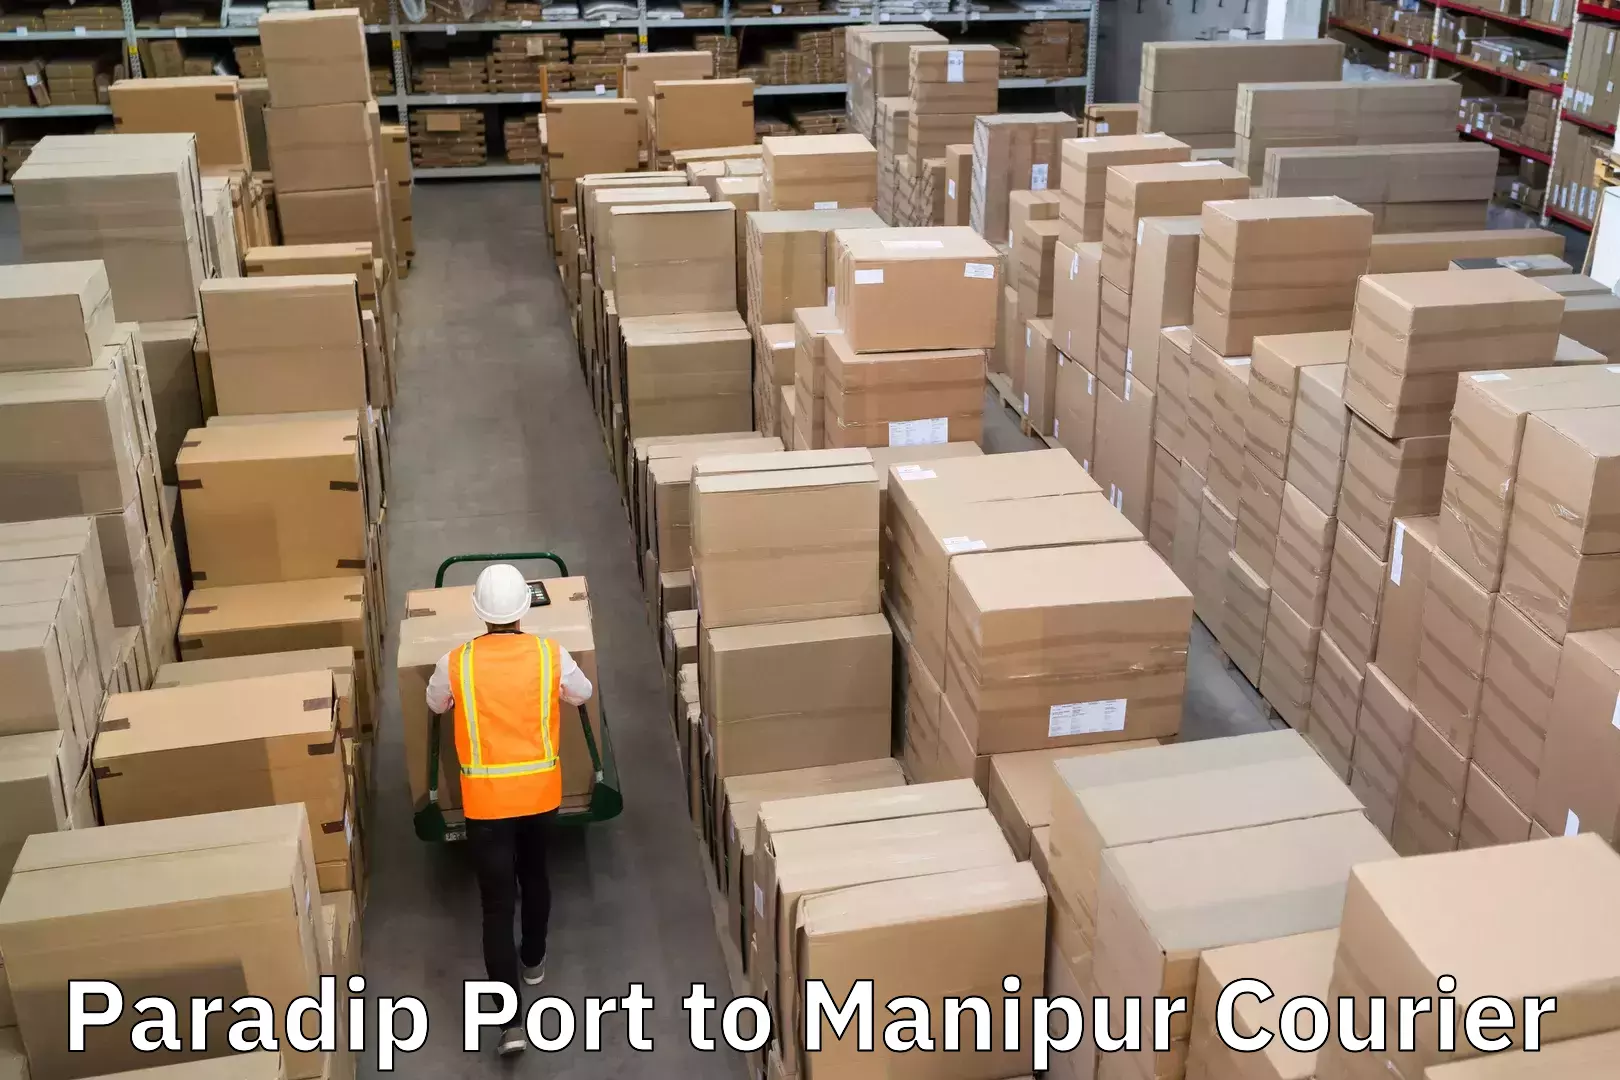 Fast delivery service Paradip Port to NIT Manipur